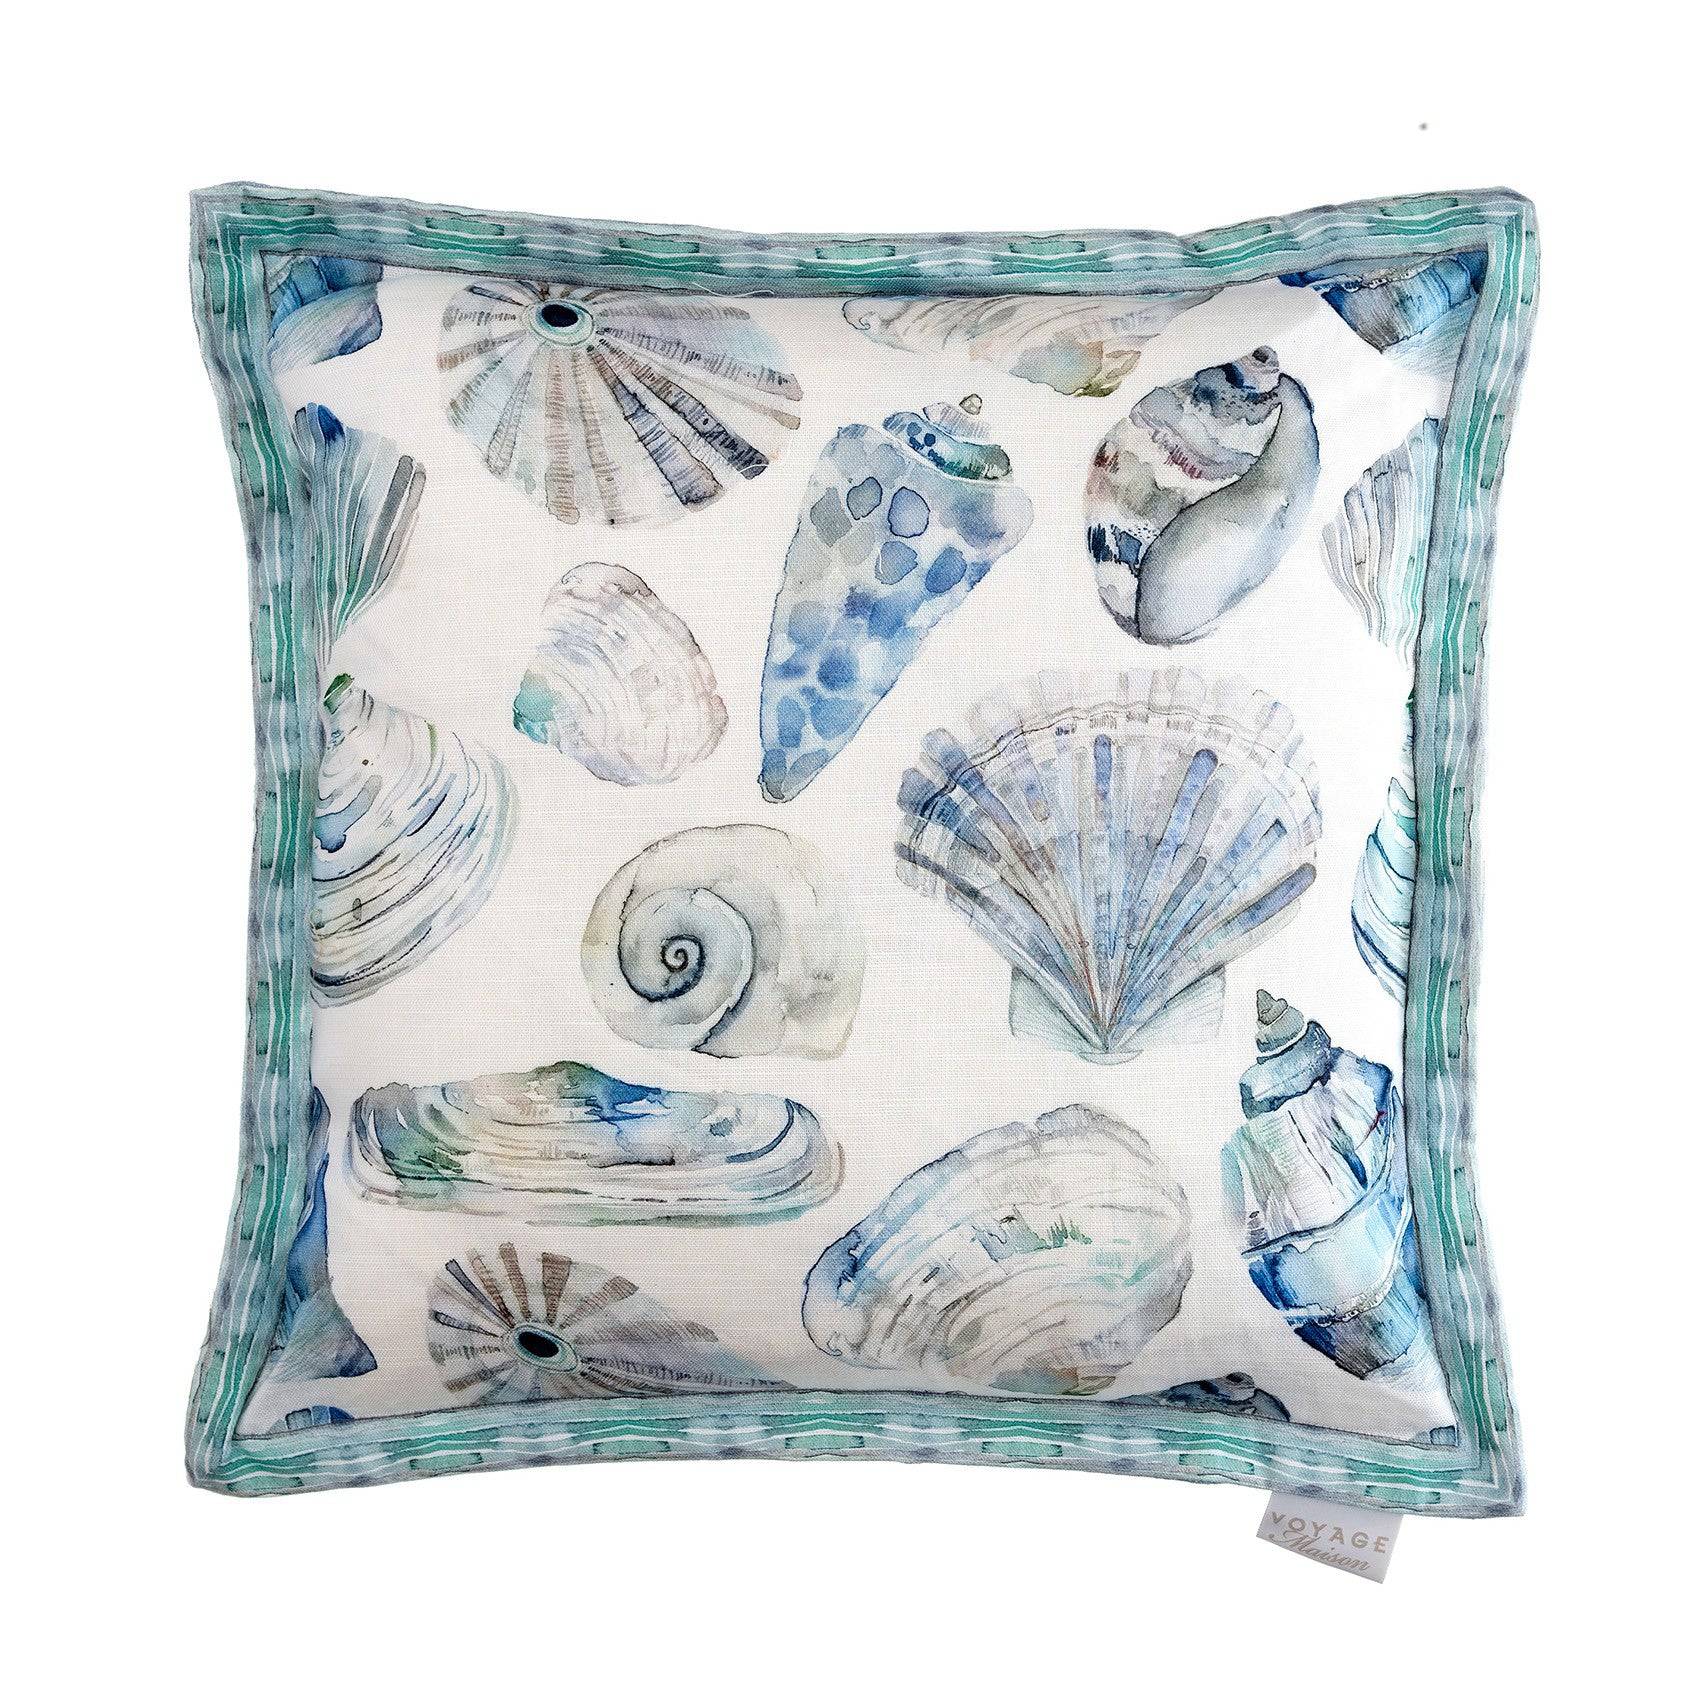 Rock Pool Marine Linen Cushion for sale - Woodcock and Cavendish